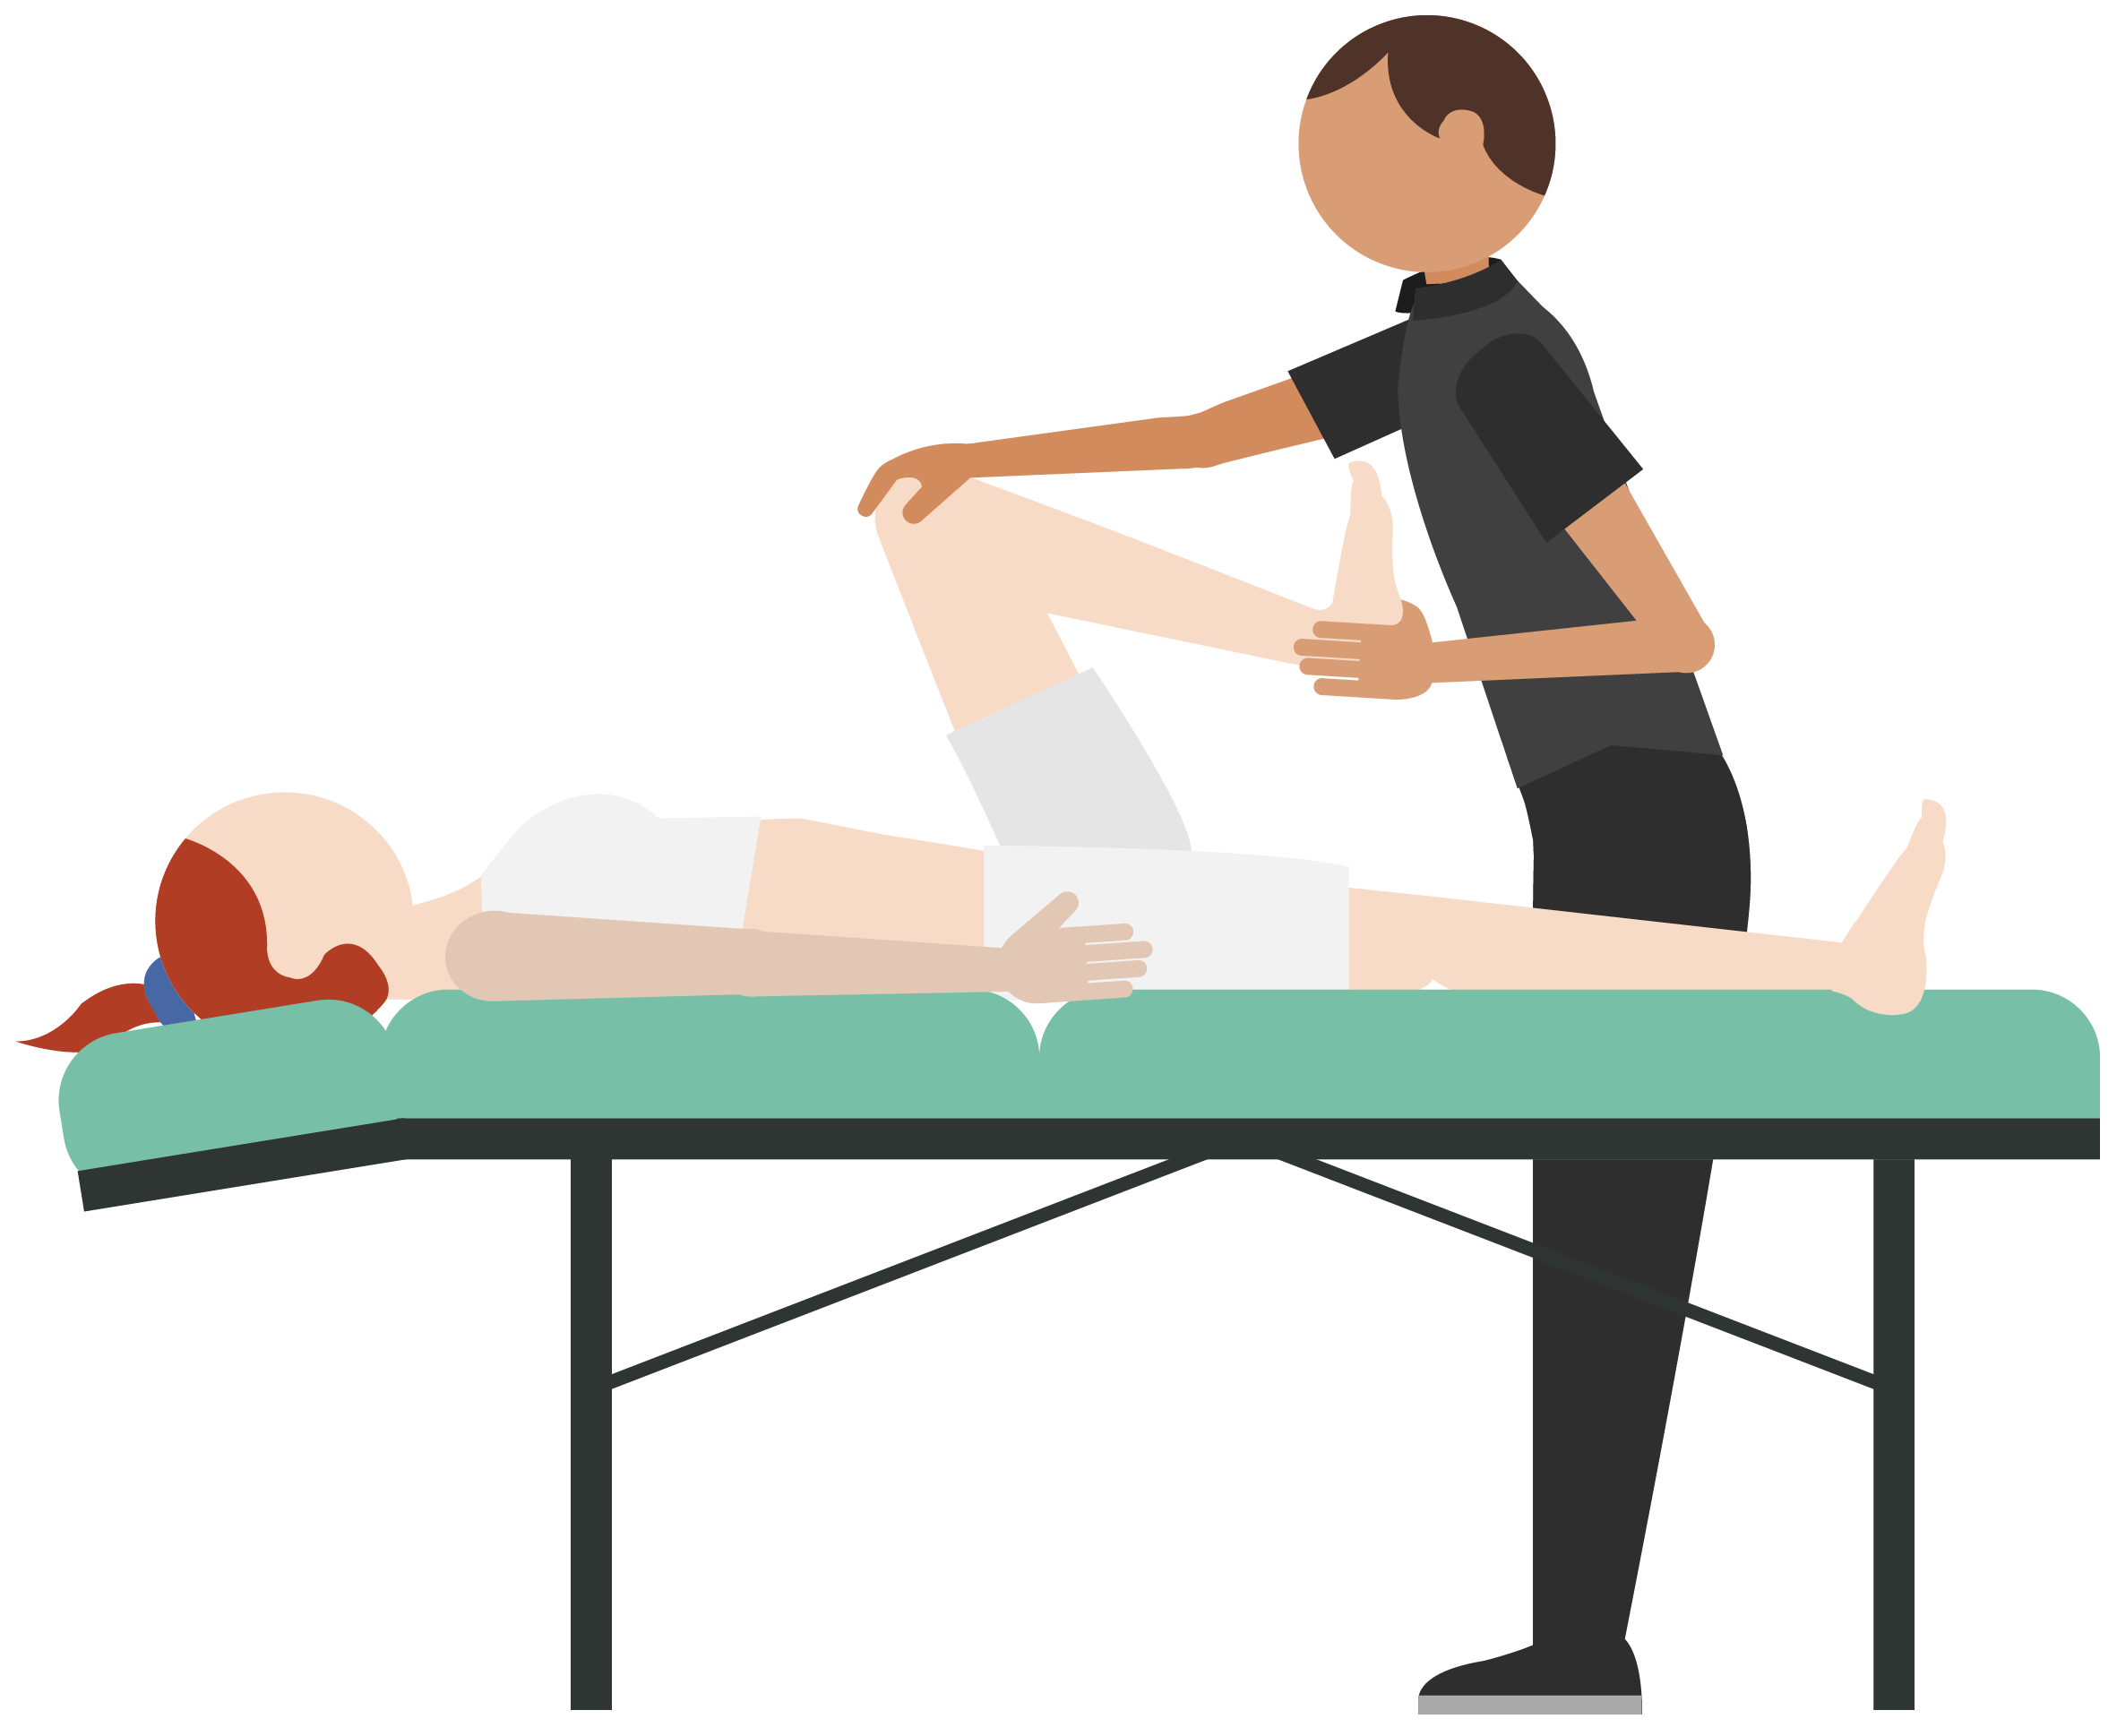 massages clipart massage therapy